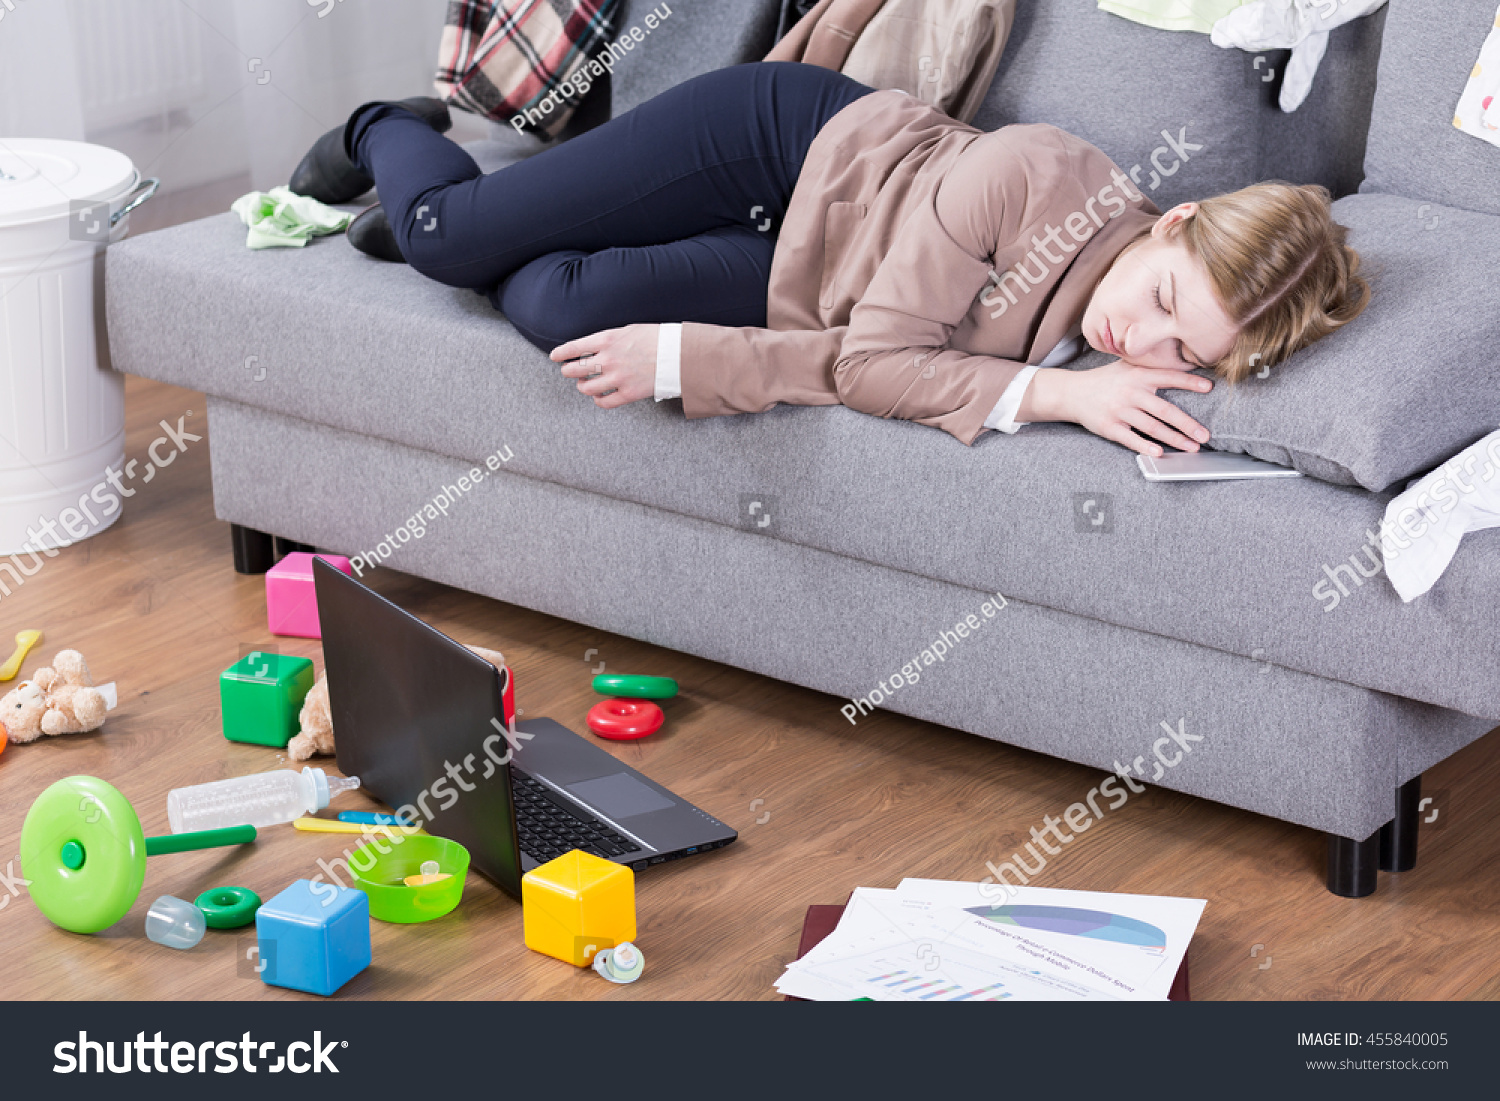 Young mother sleeping in her office clothes on a sofa in a messy living room #455840005